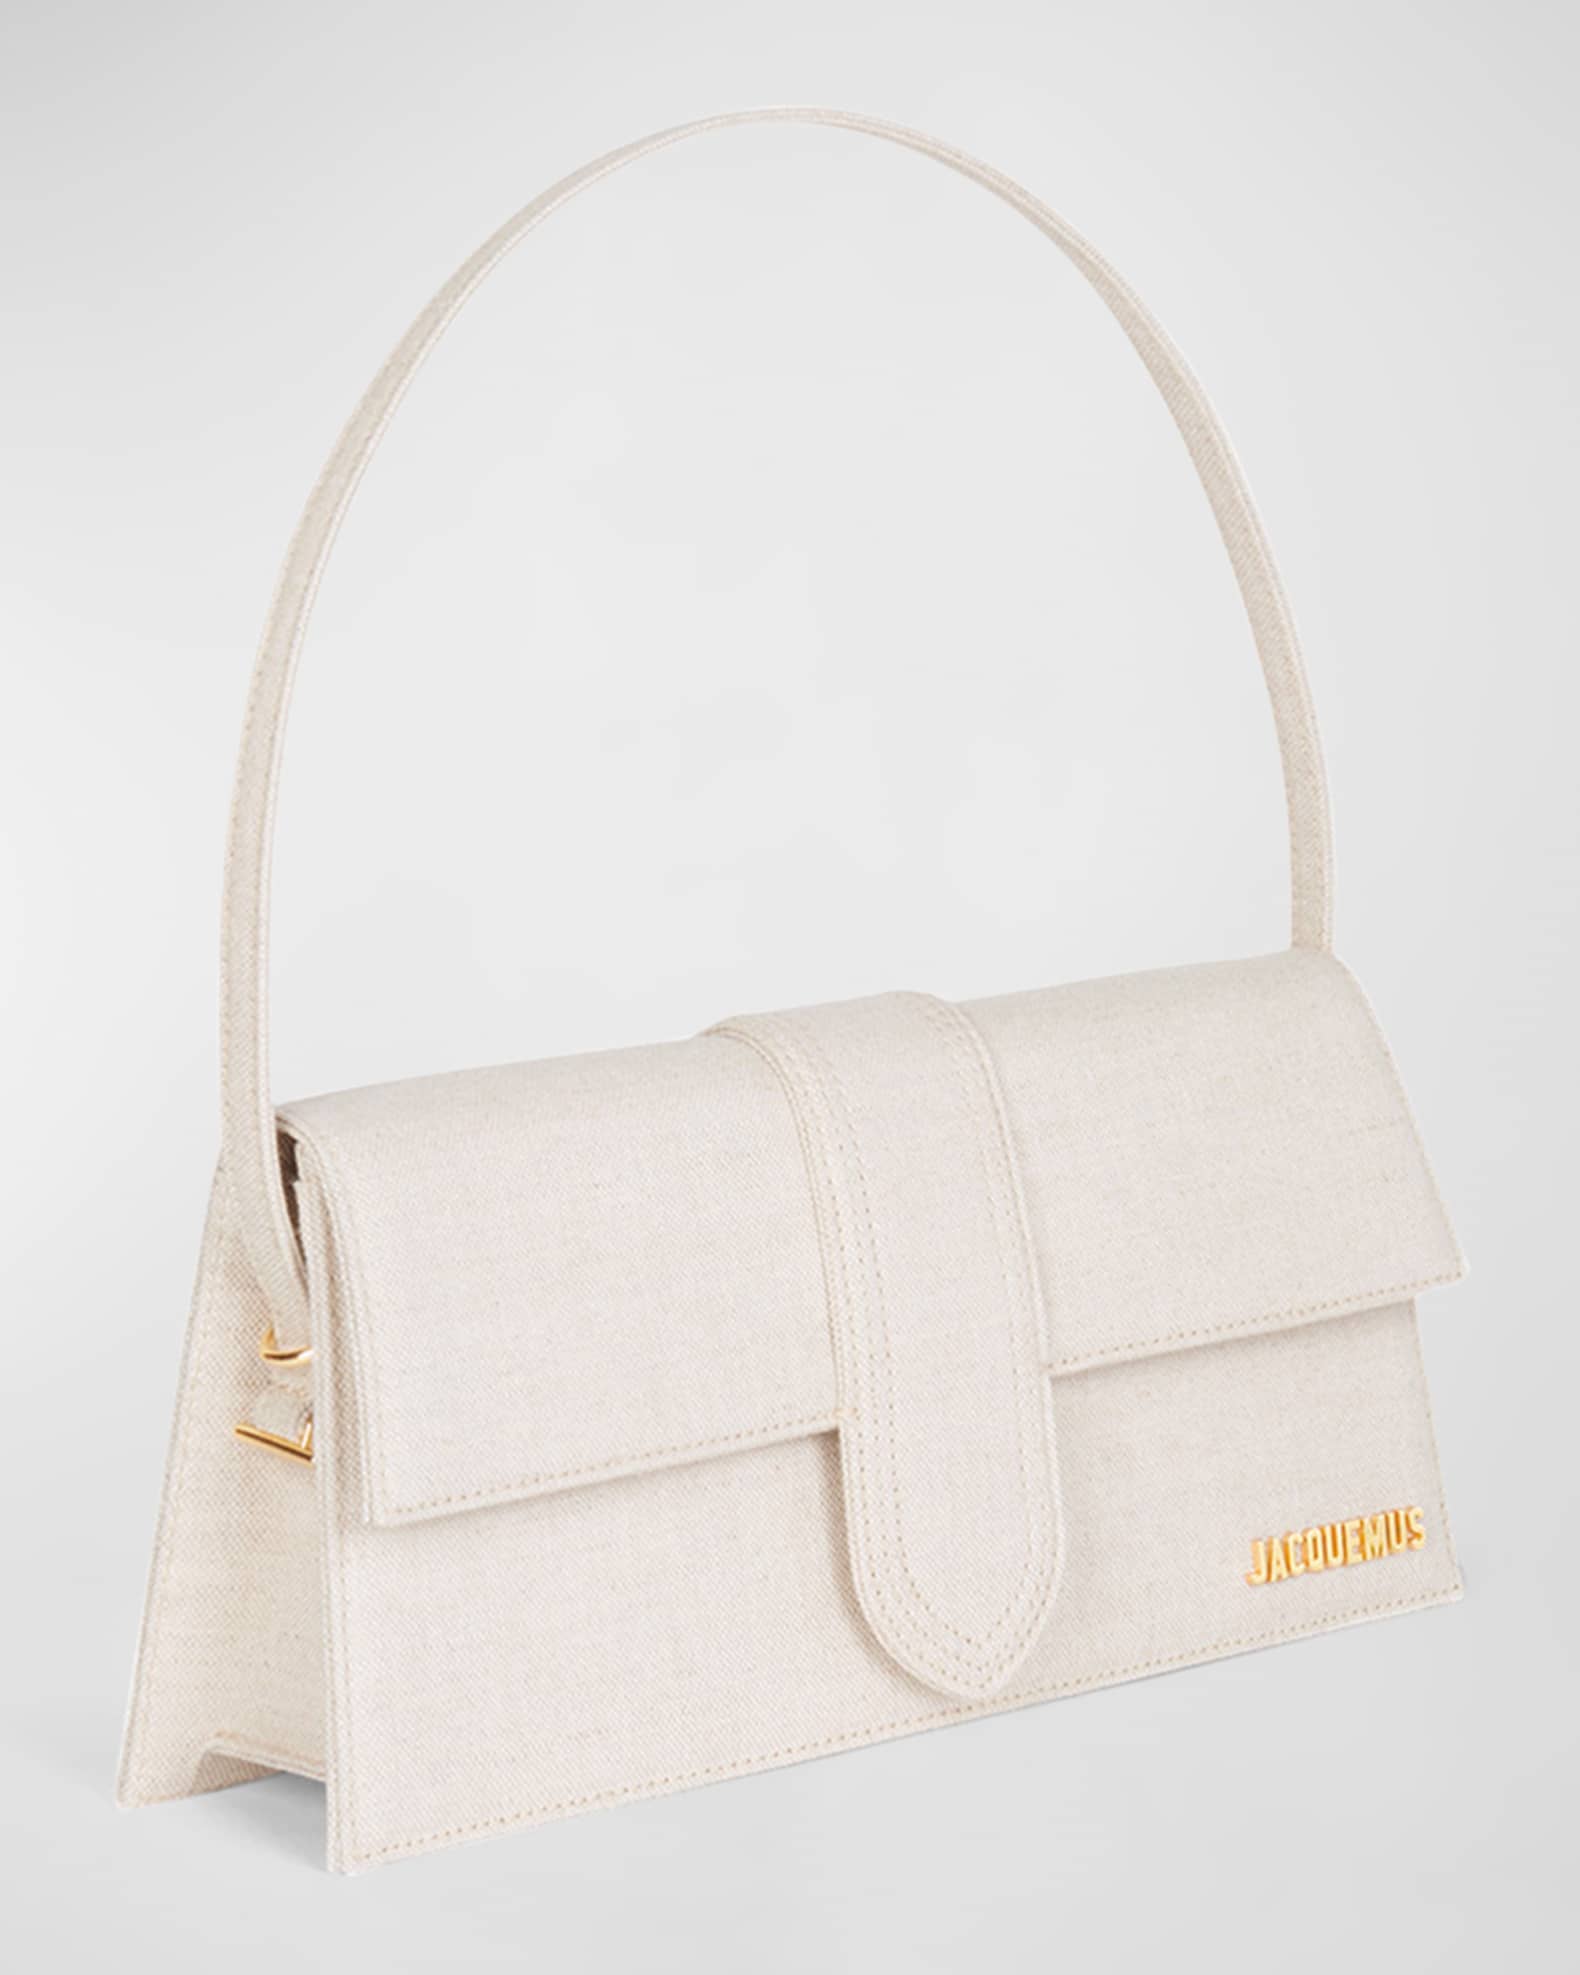 Le Bambino Long leather-trimmed wicker shoulder bag